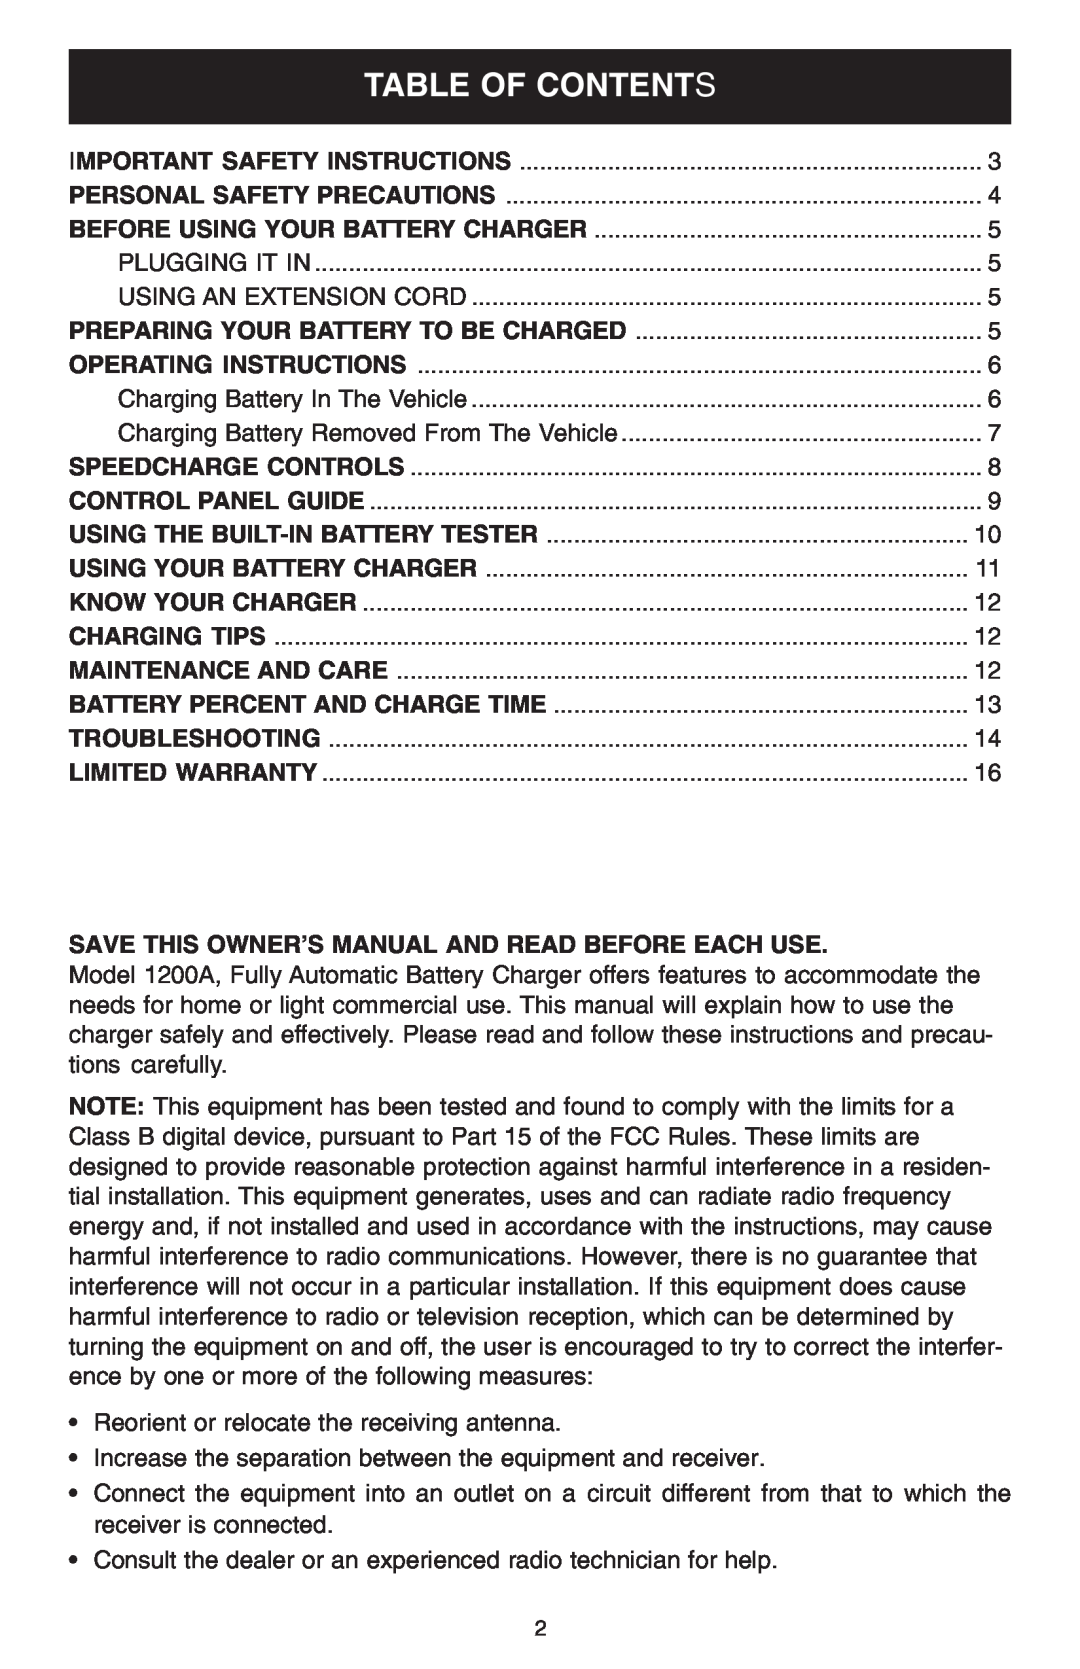 Schumacher 1200A owner manual Table Of Contents, Save This Owner’S Manual And Read Before Each Use 